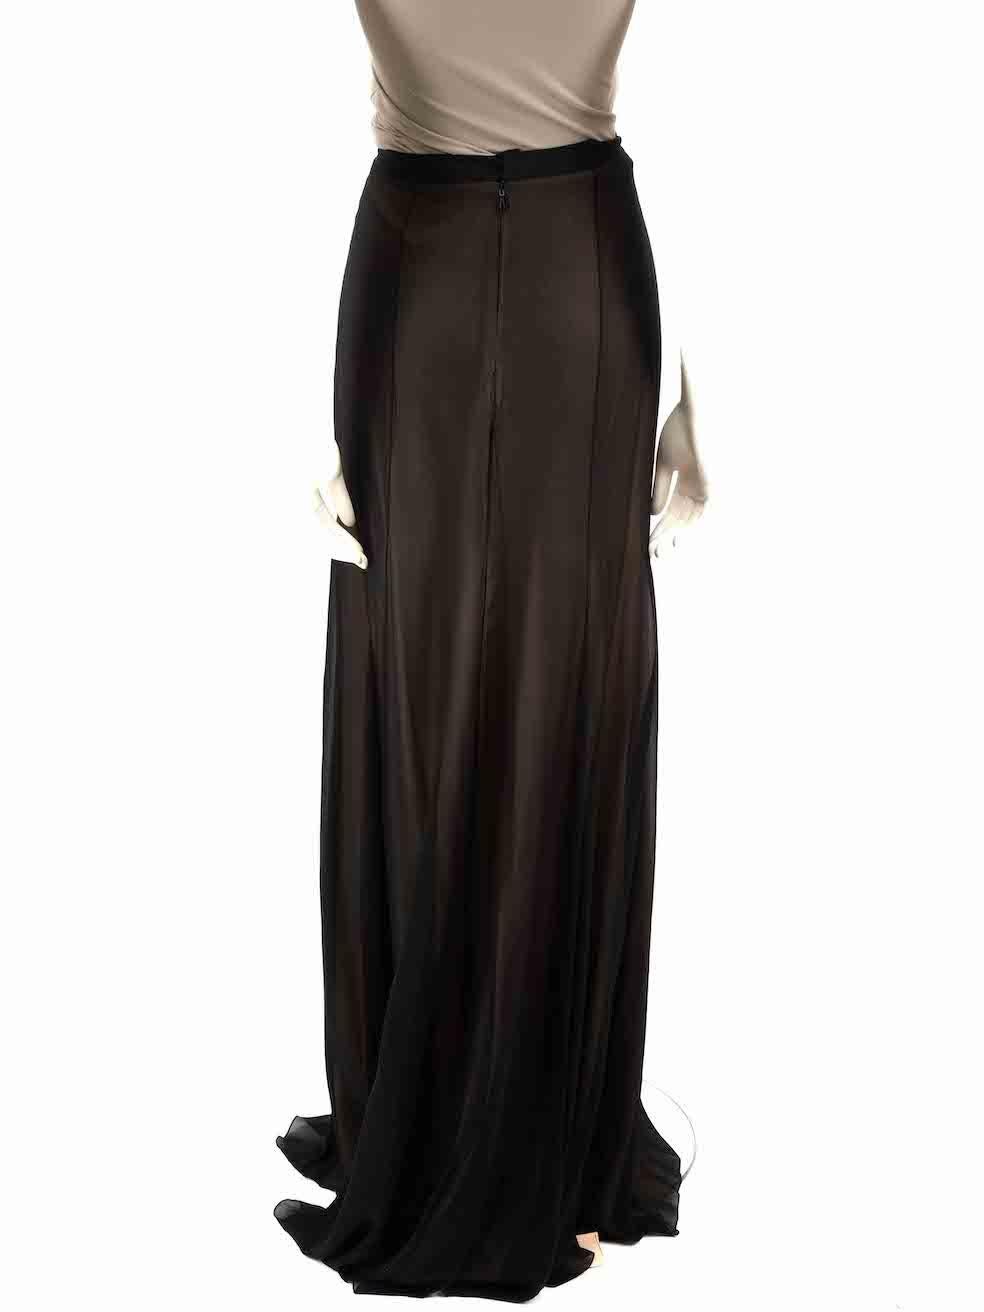 Honayda Black Sheer Overlay Maxi Skirt Size XXL In Good Condition For Sale In London, GB